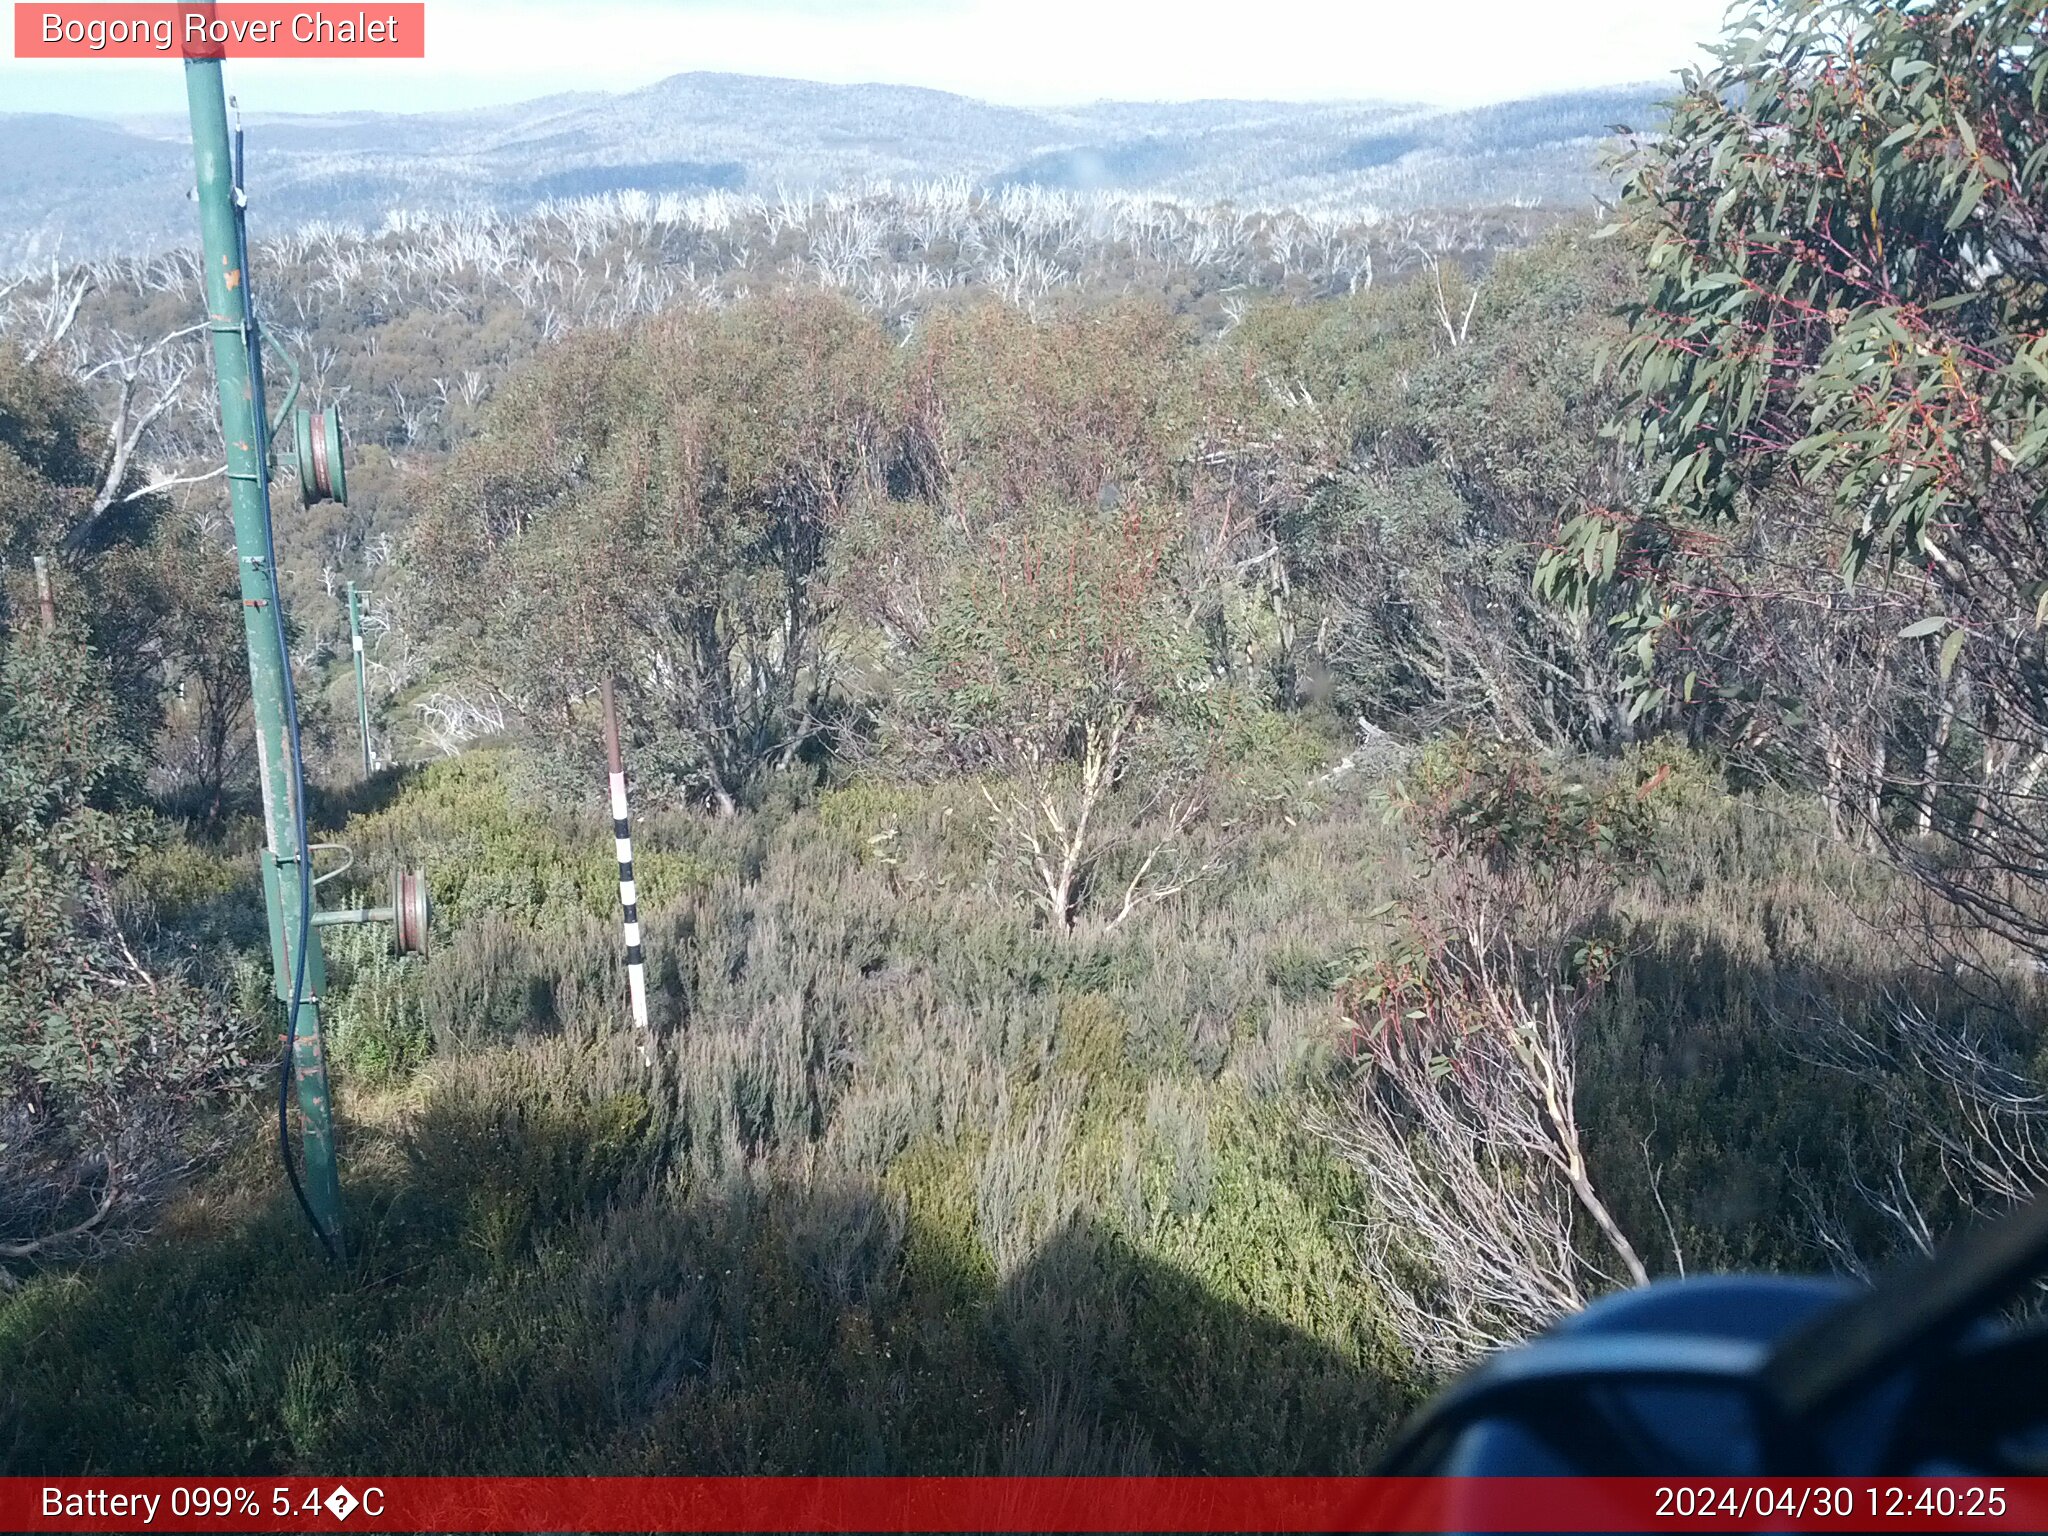 Bogong Web Cam 12:40pm Tuesday 30th of April 2024